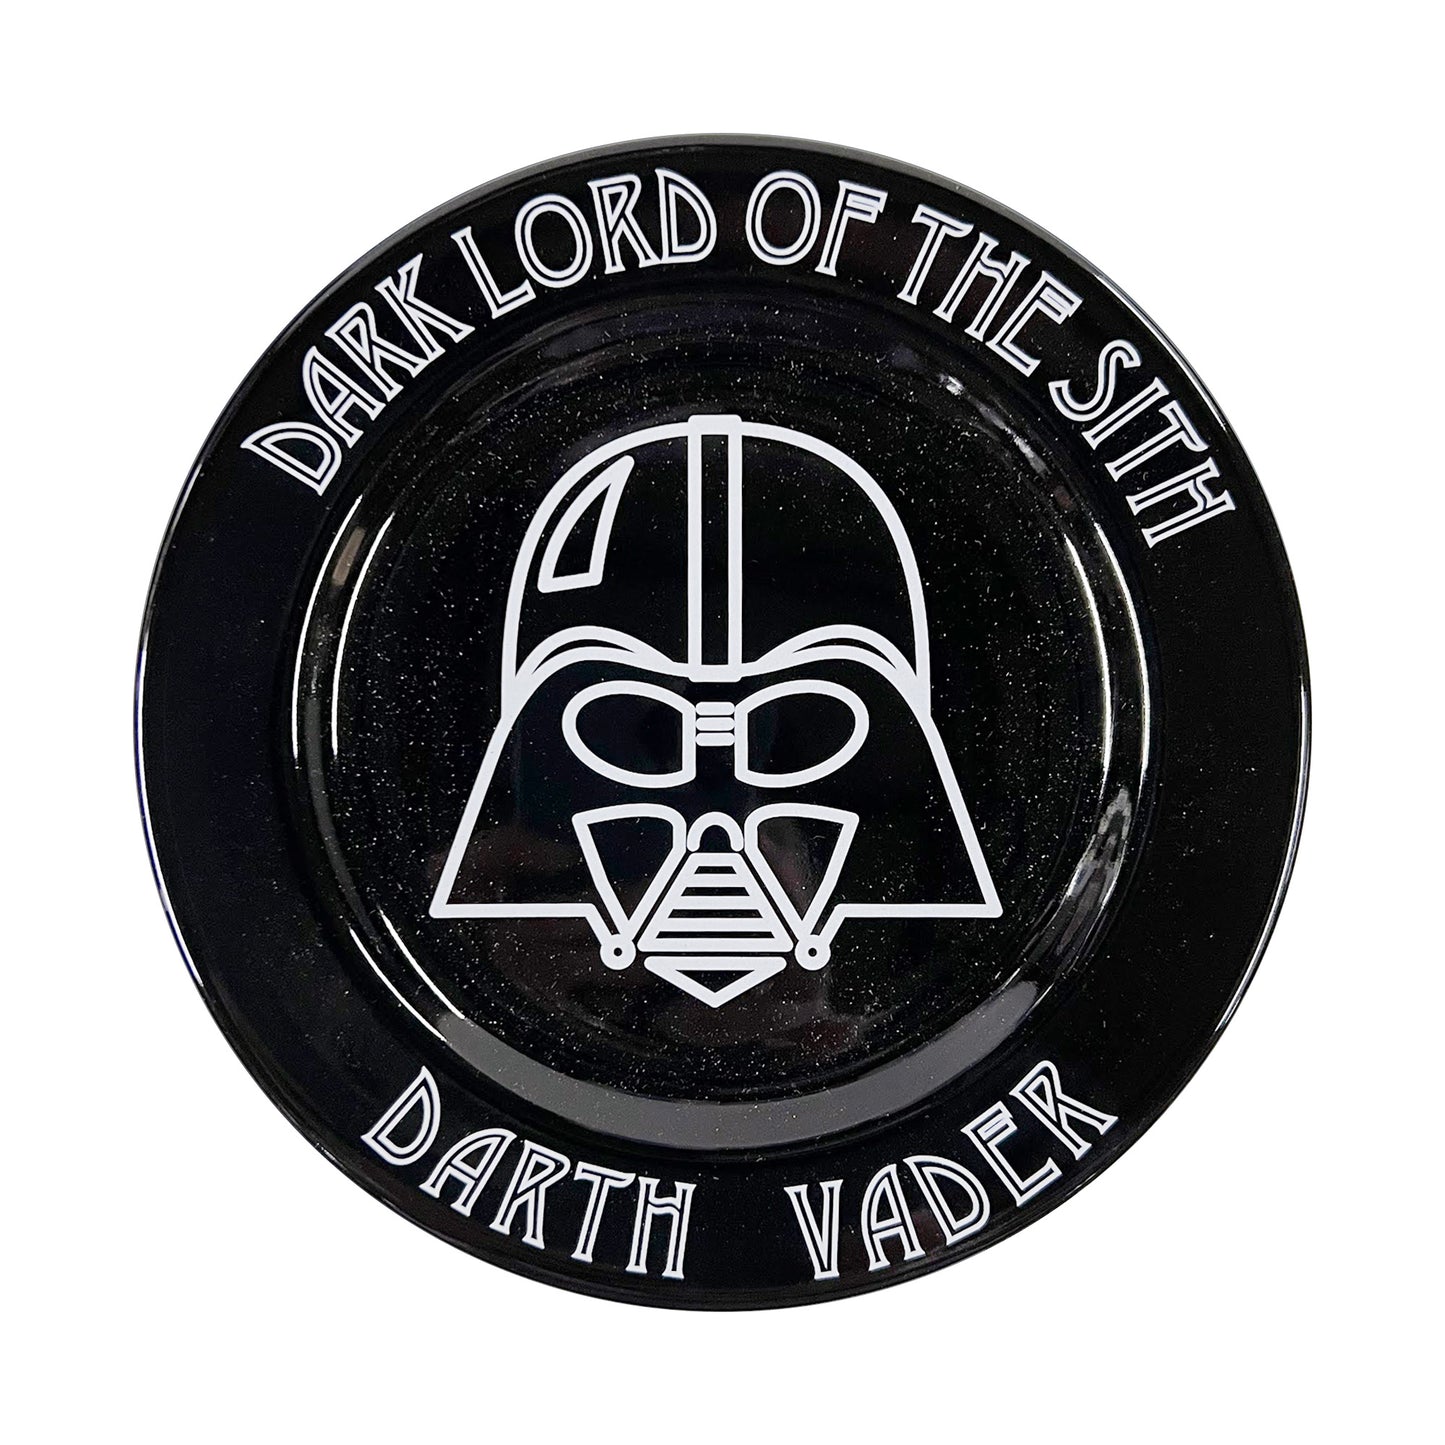 Star Wars - Dark Lord of the Sith Darth Vader Plate Made in Japan